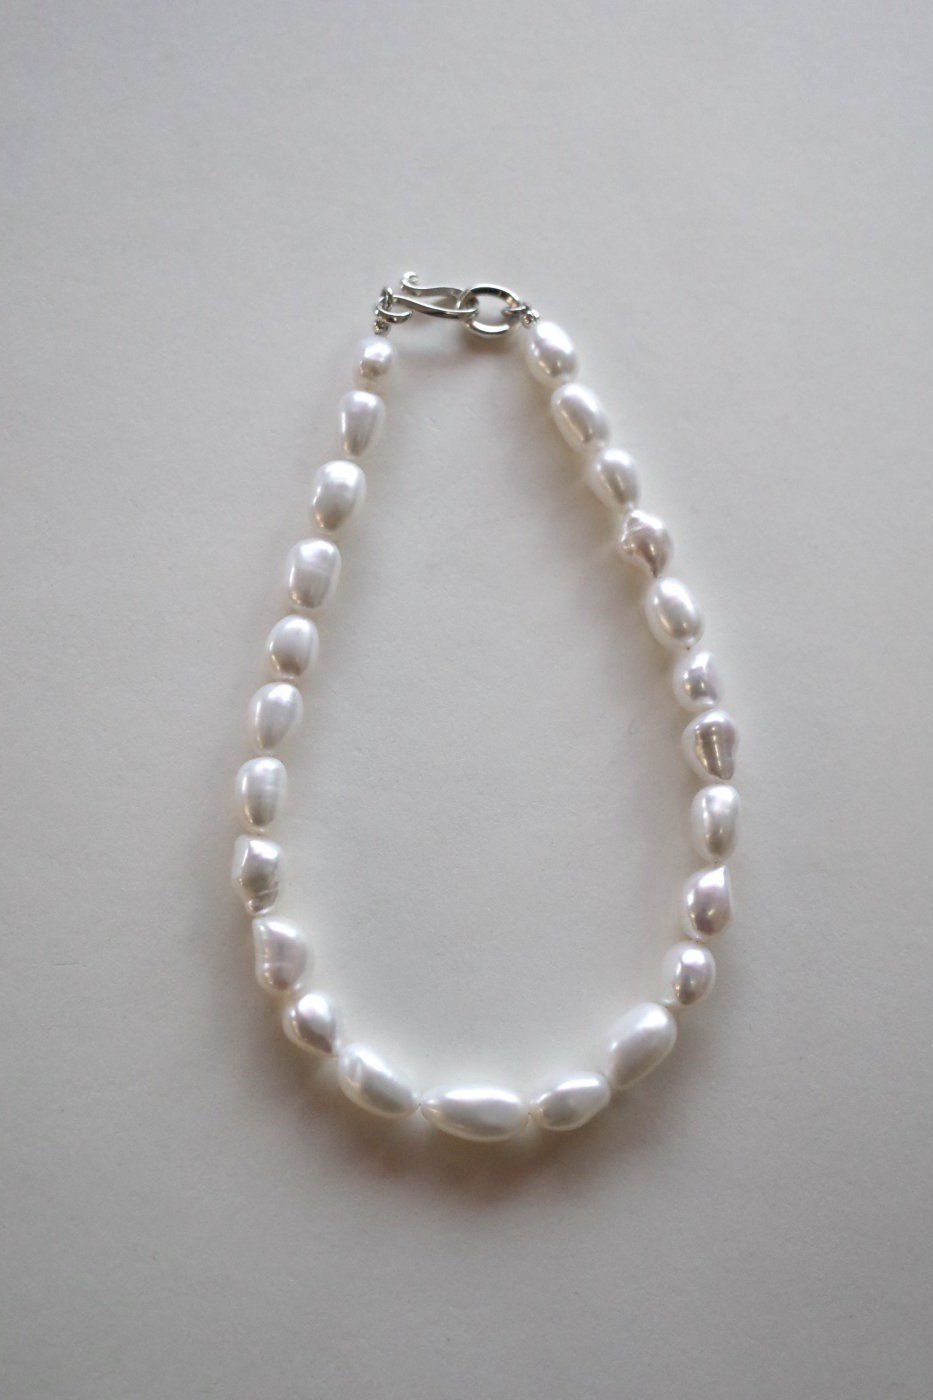 <img class='new_mark_img1' src='https://img.shop-pro.jp/img/new/icons56.gif' style='border:none;display:inline;margin:0px;padding:0px;width:auto;' />R.ALAGAN -SHORT PEARL NECKLACE